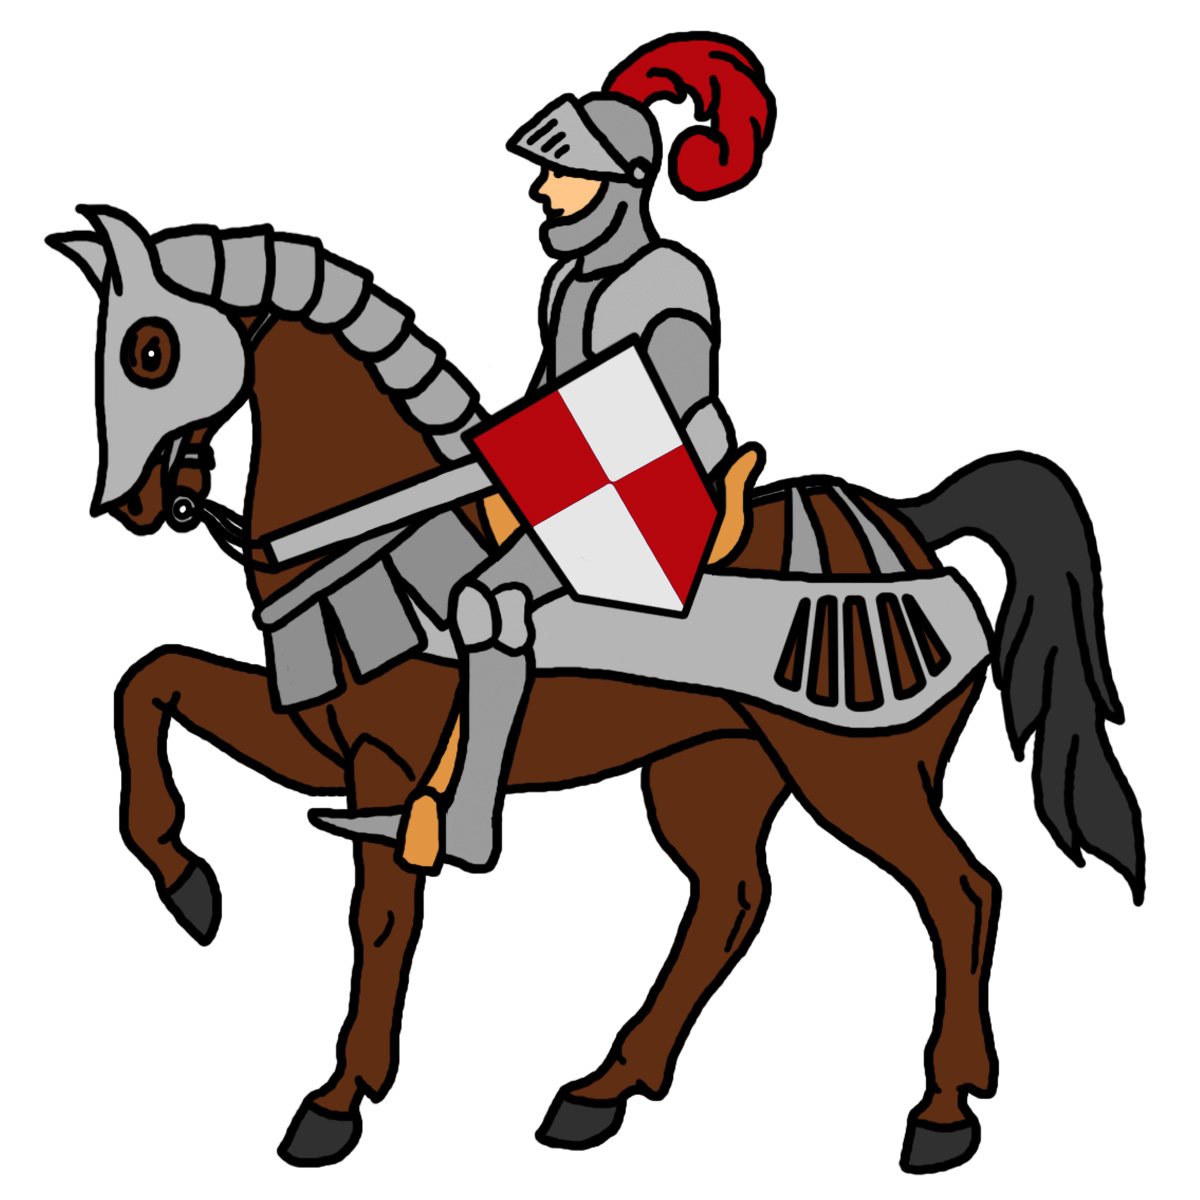 Knight clip art in vector or format free 3